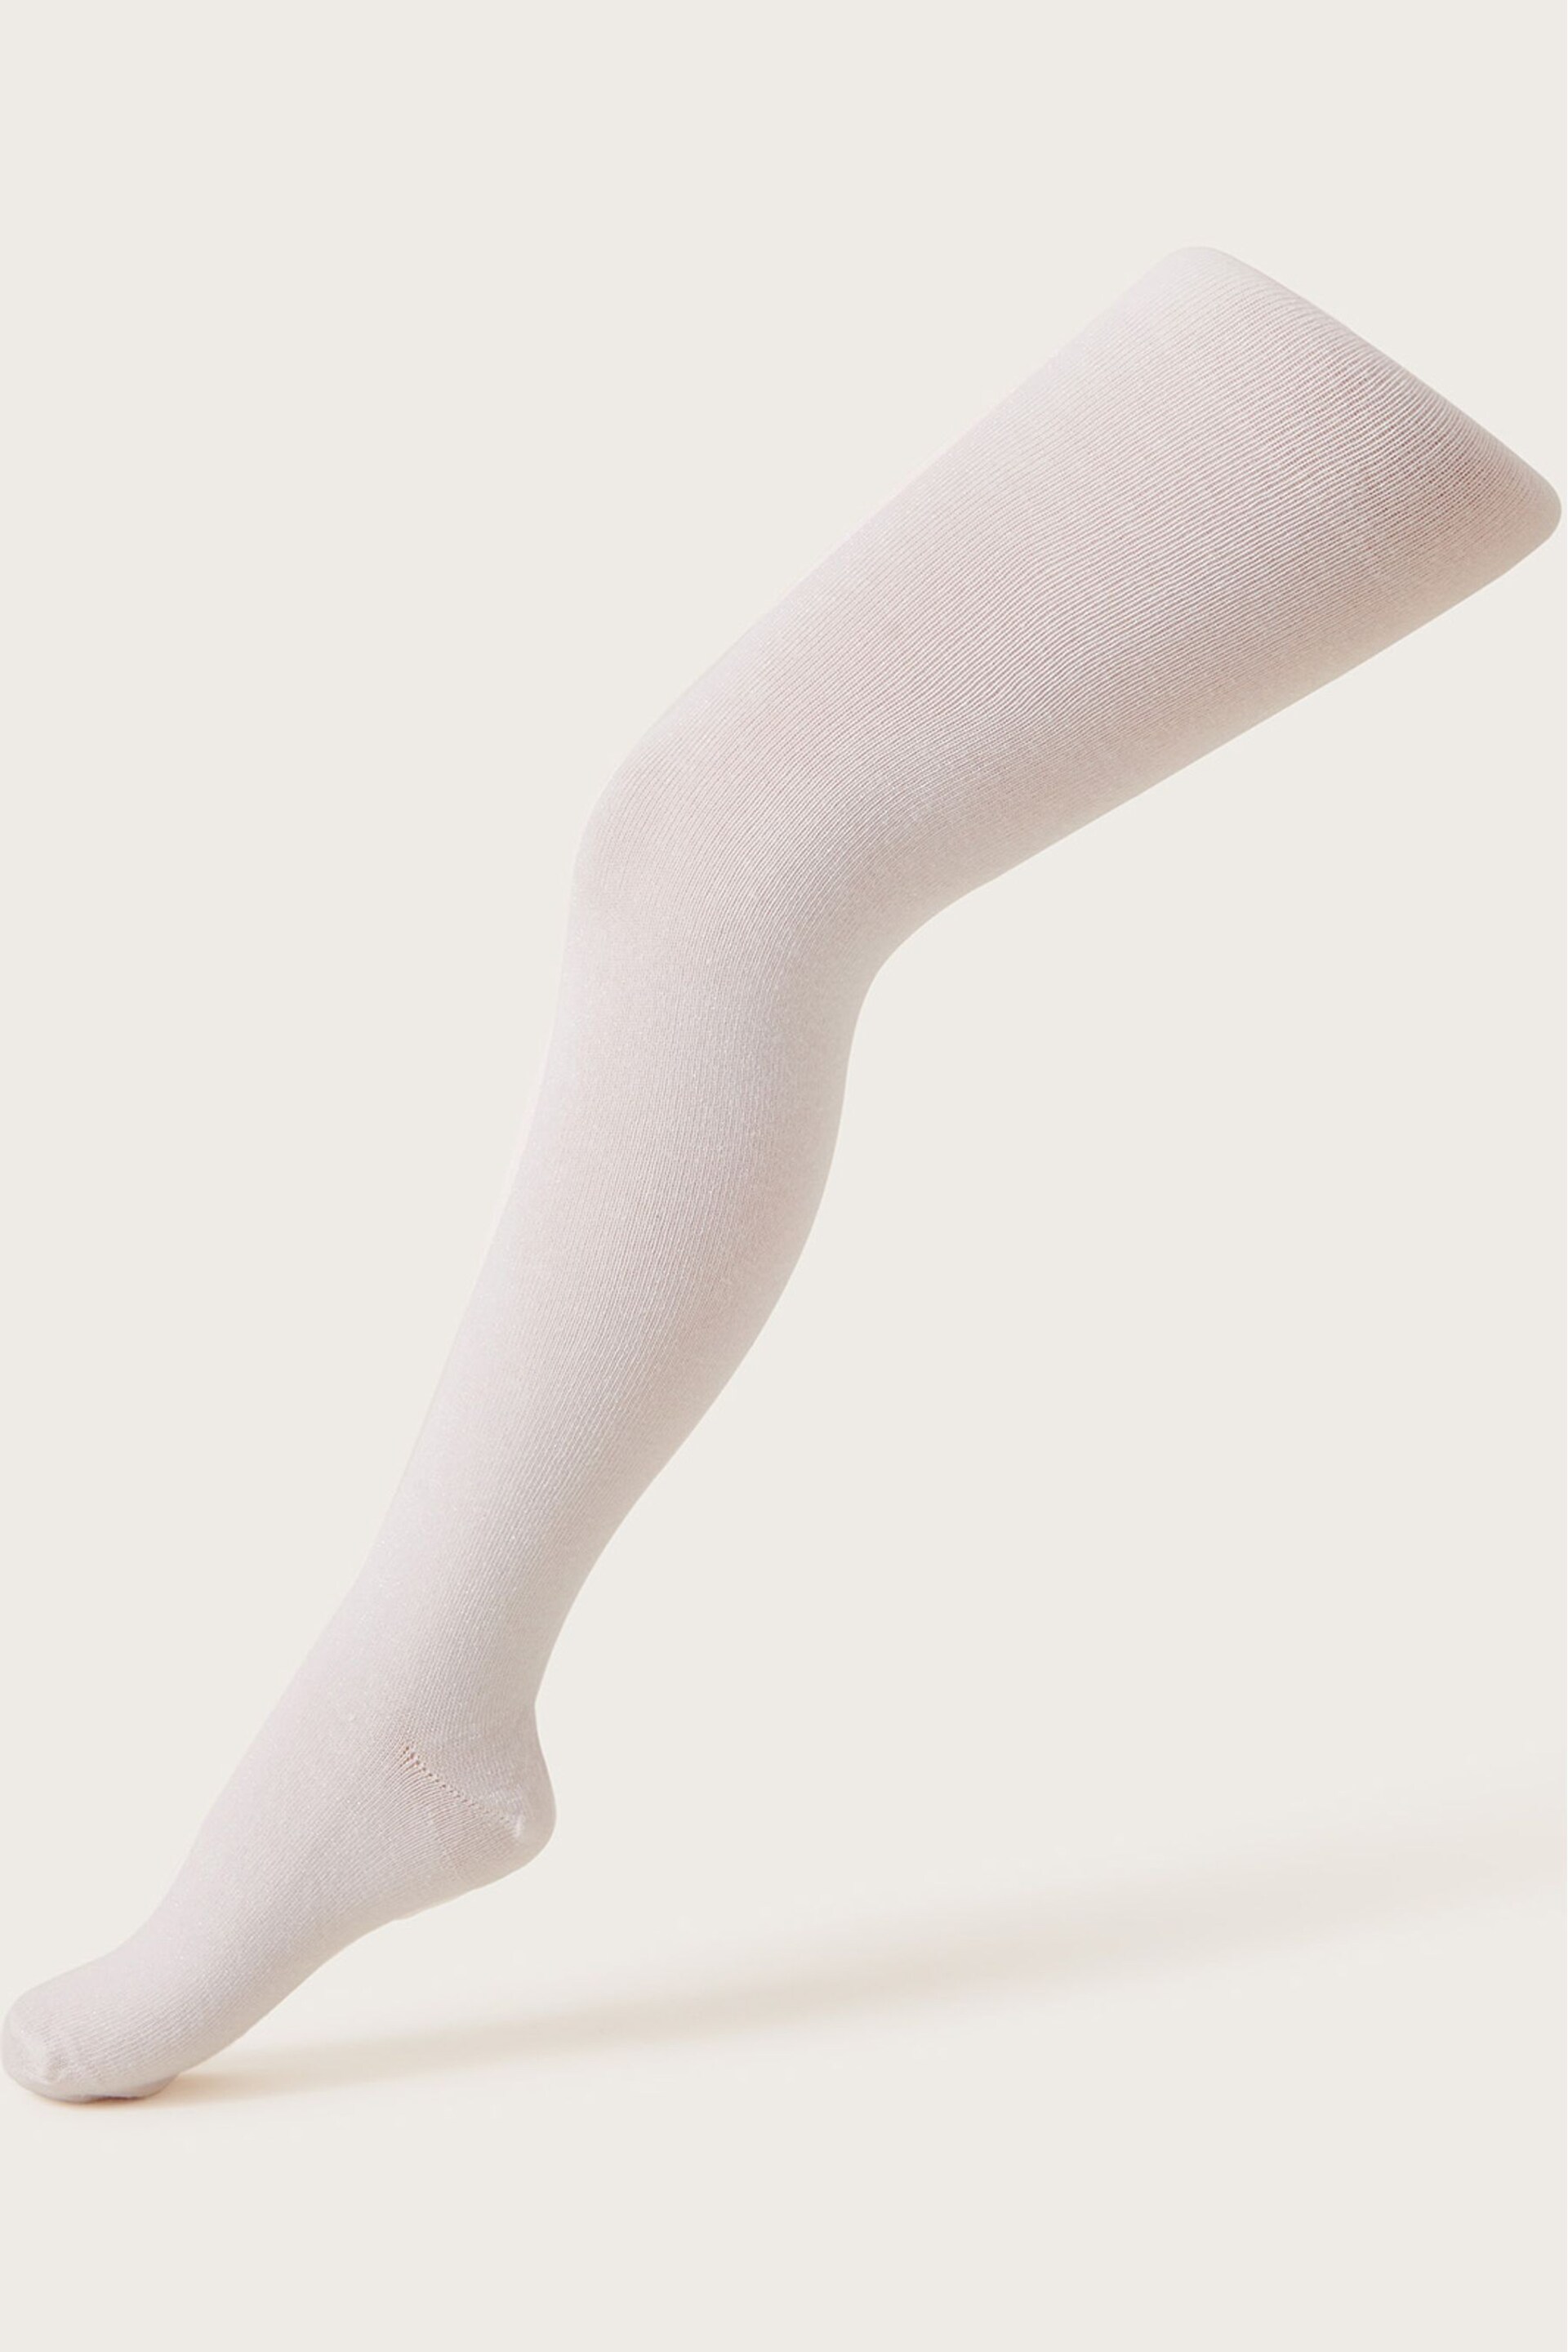 Monsoon White Frosted Tights - Image 1 of 2